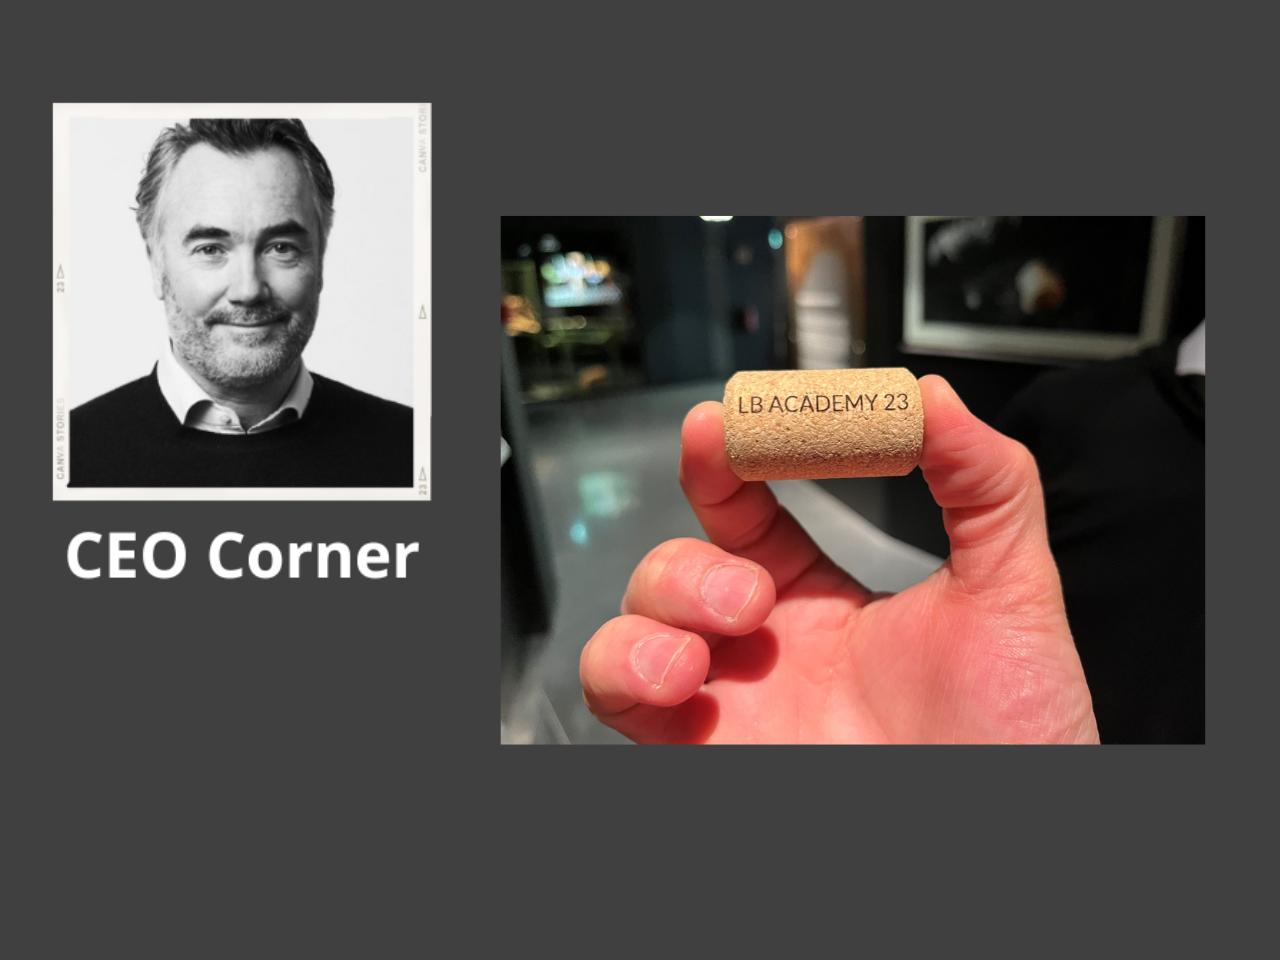 Picture shows Jan Patrick Schulz, Landbell Group's CEO and a hand holding a cork engraved with Landbell Academy 2023